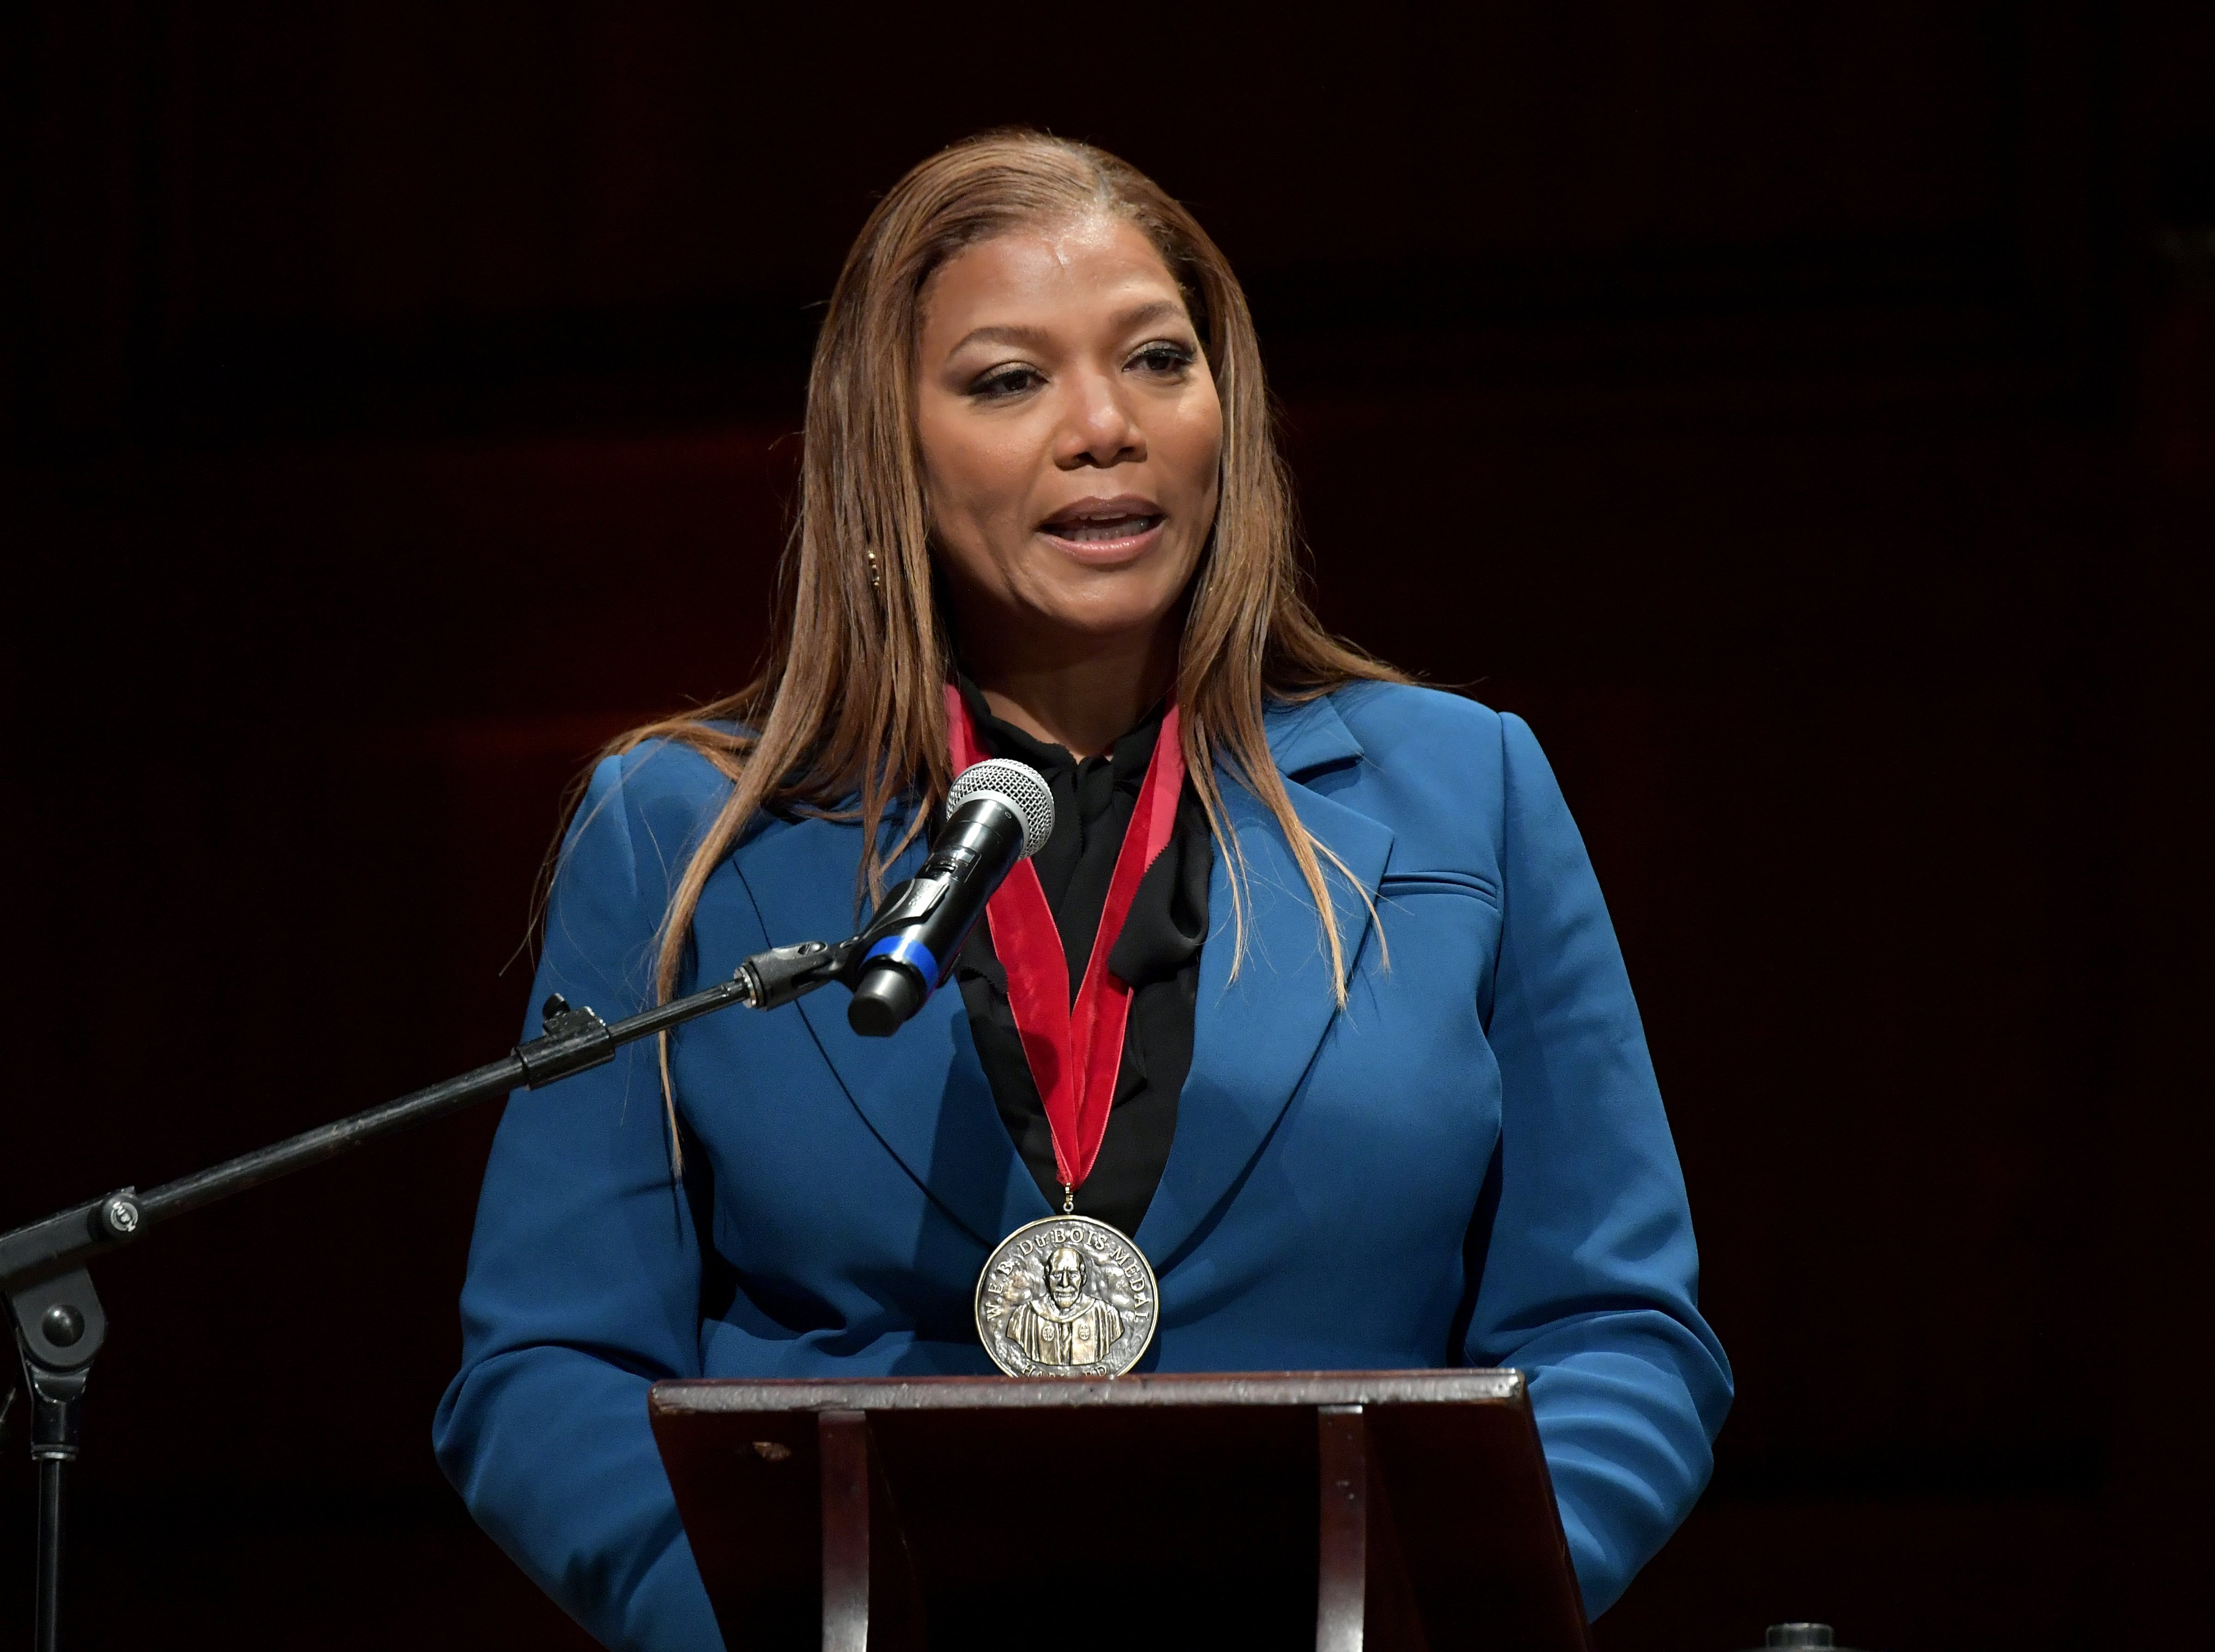 Queen Latifah delivering her powerful acceptance speech at Harvard University. | Photo: Getty Images